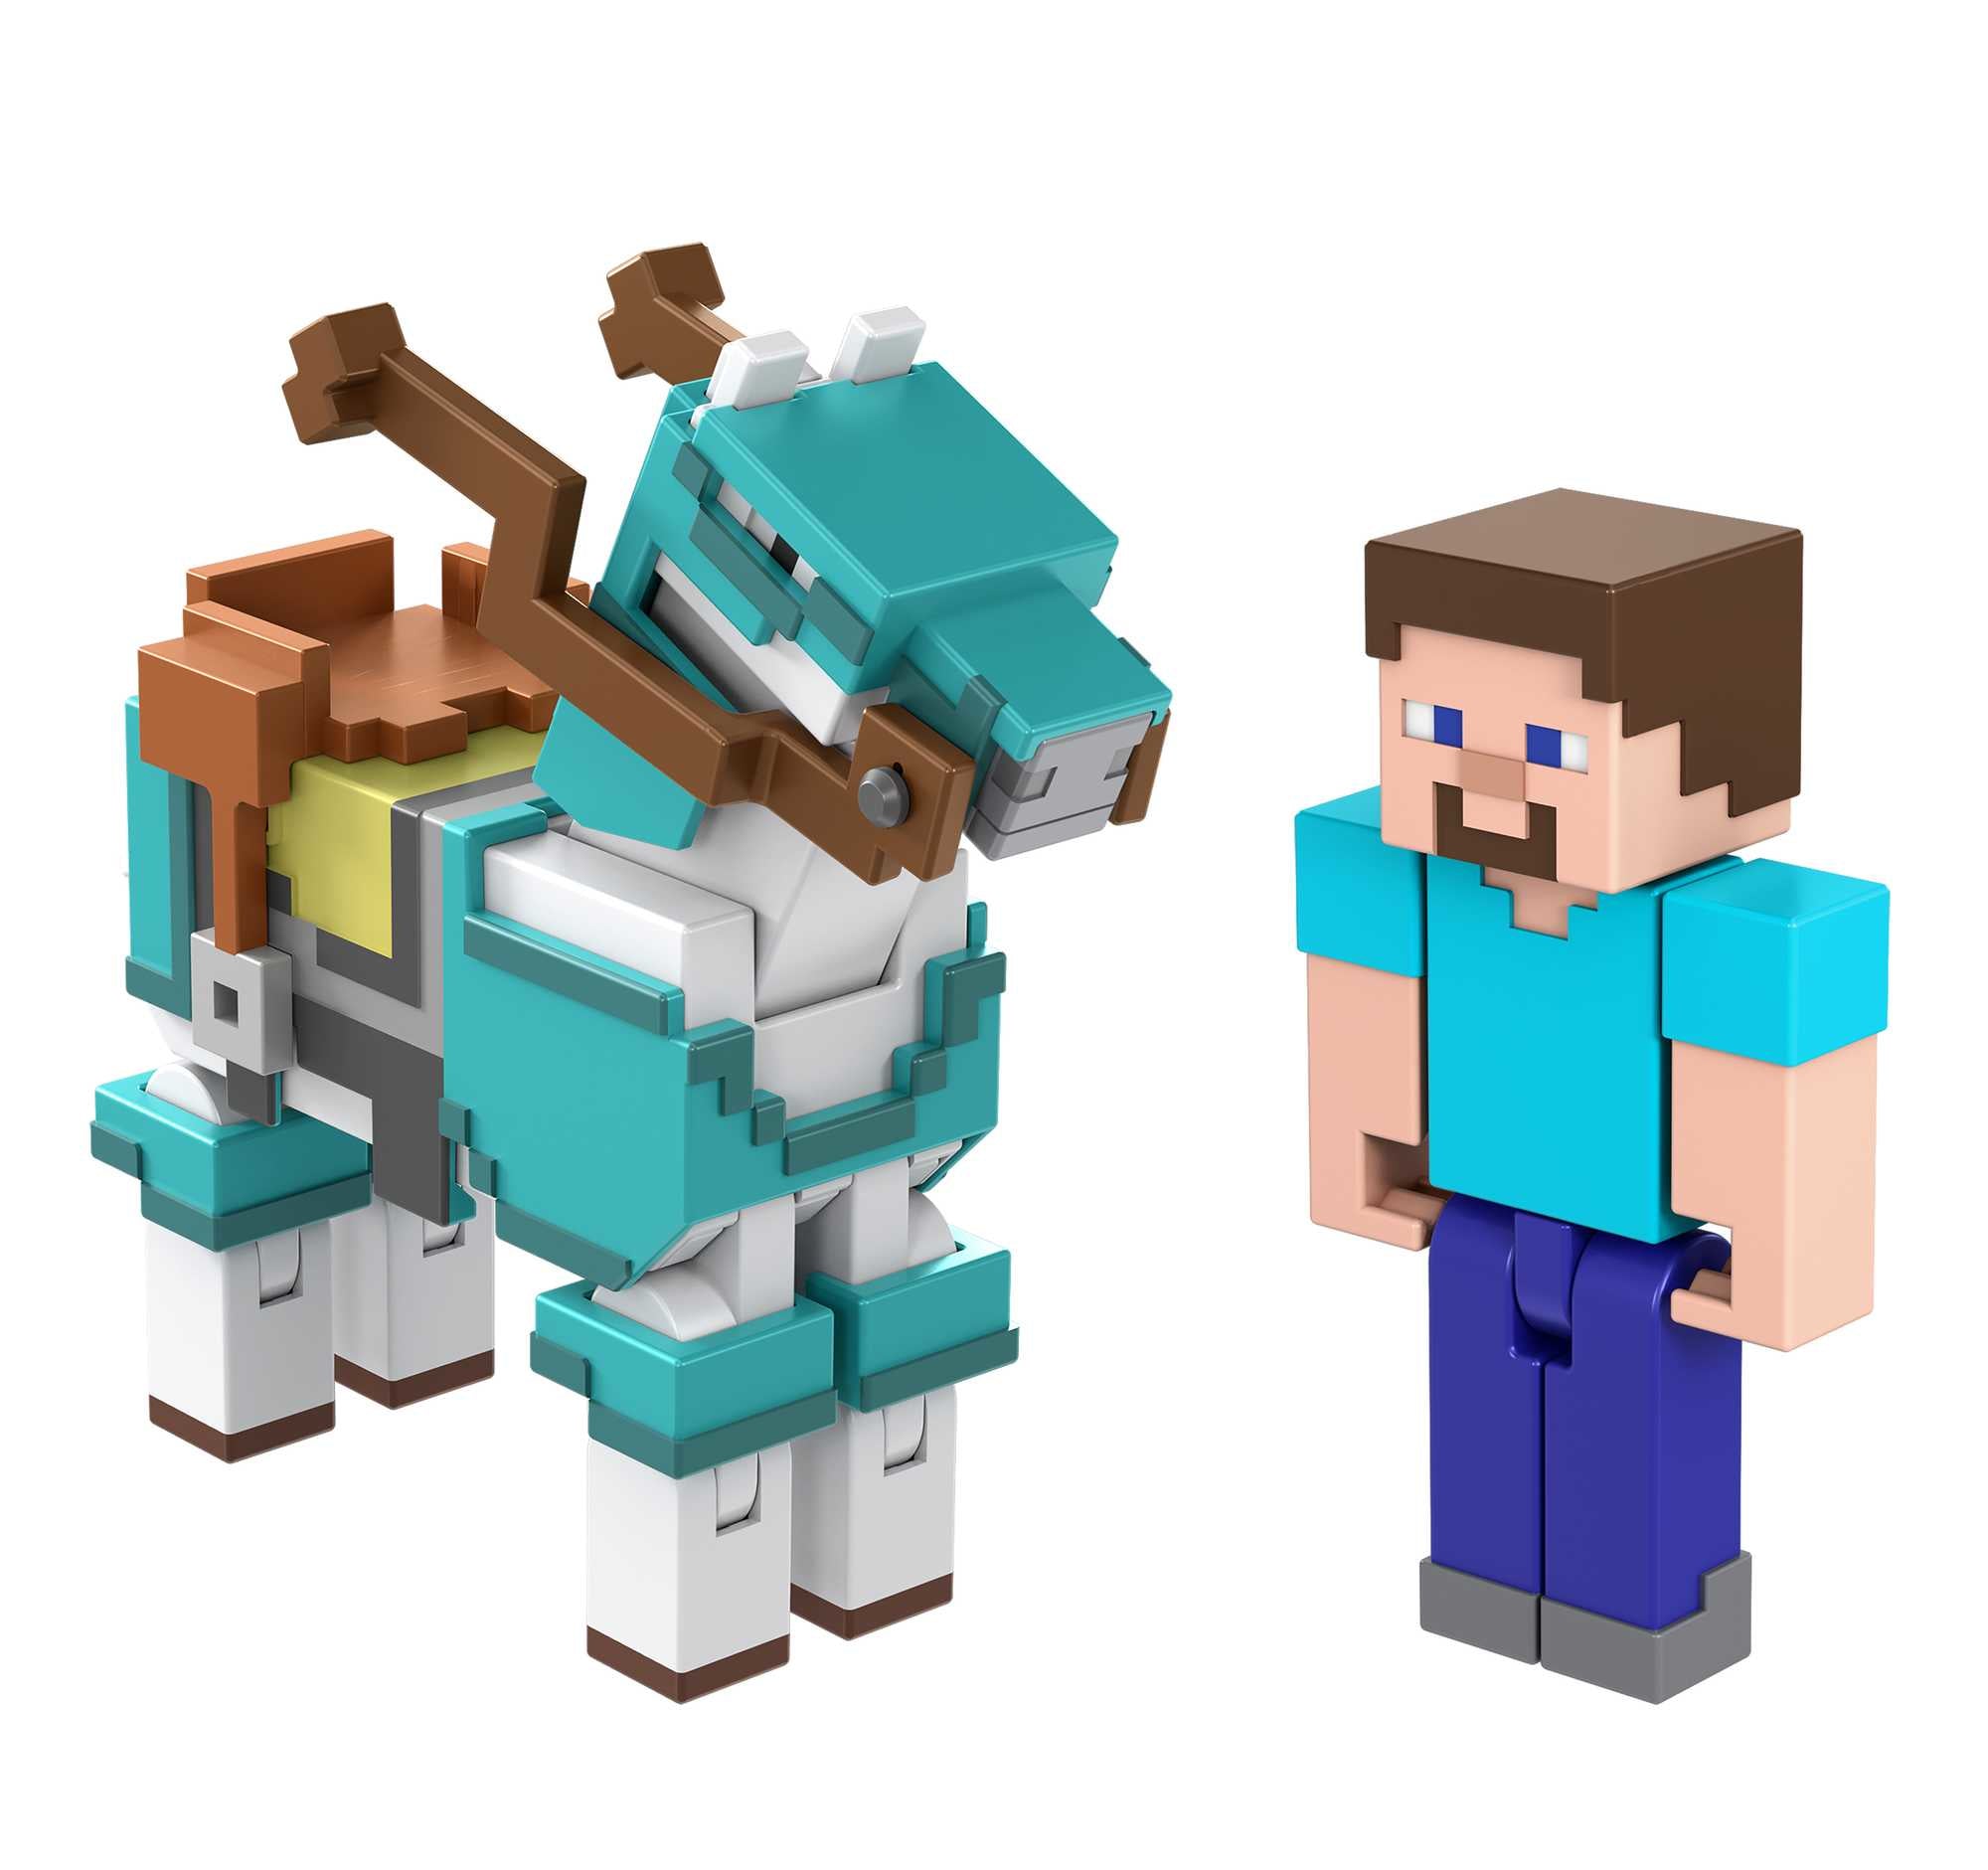 Minecraft - Armored Horse and Steve Figures (HDV39)